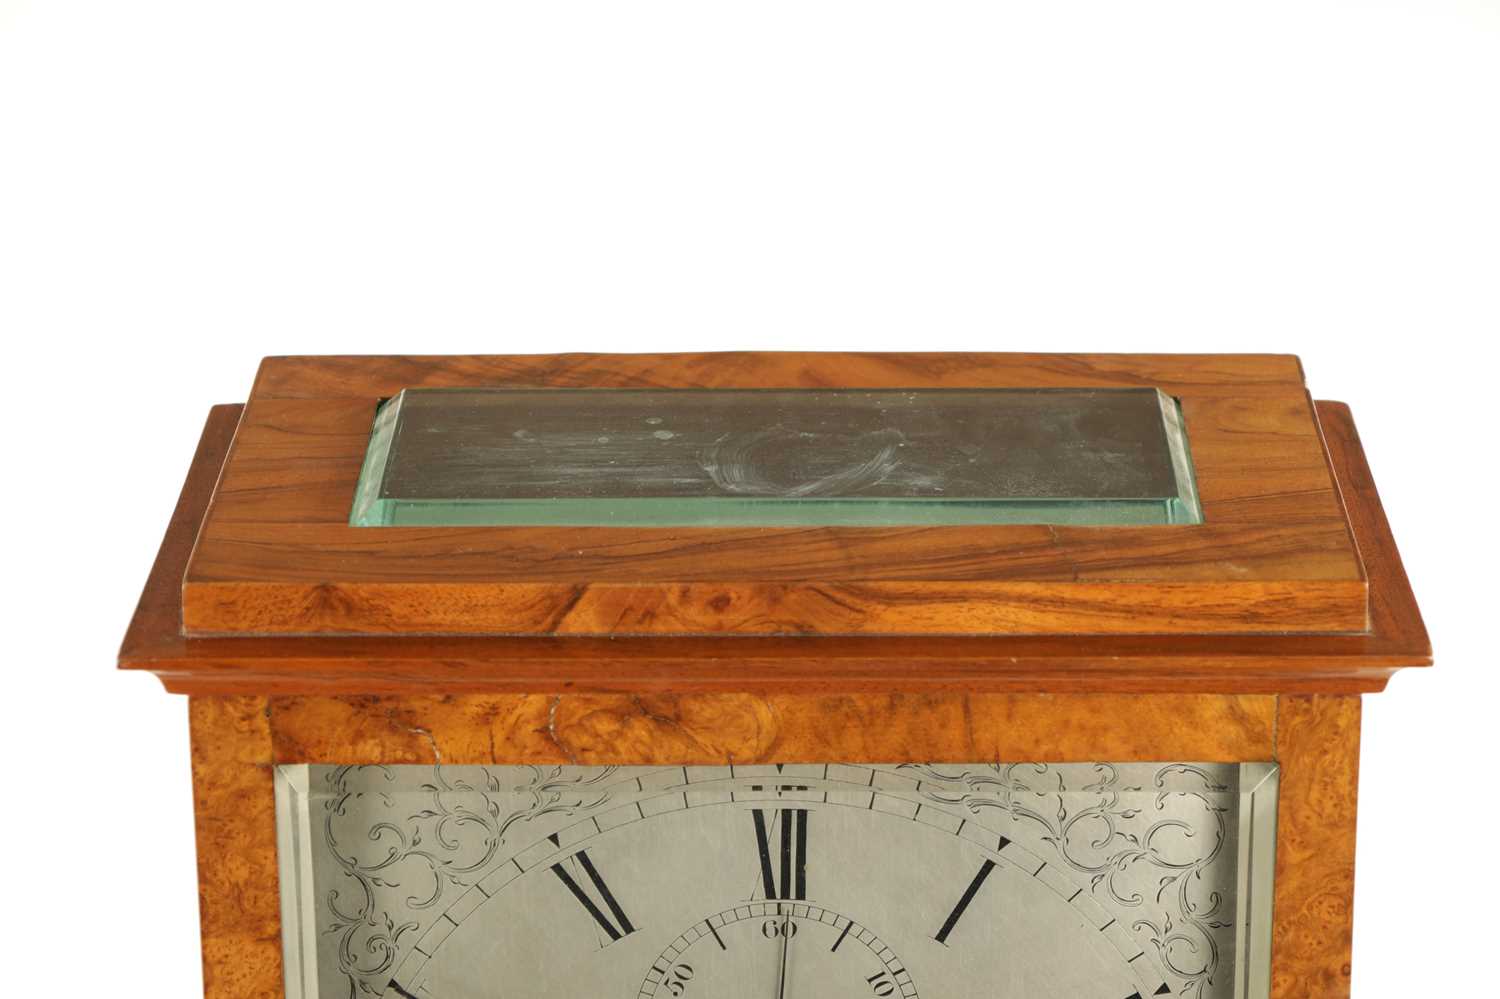 NORMAN, PIMLICO. A LARGE MID 19TH CENTURY BURR WALNUT CASED MONTH DURATION TABLE REGULATOR CLOCK - Image 3 of 14